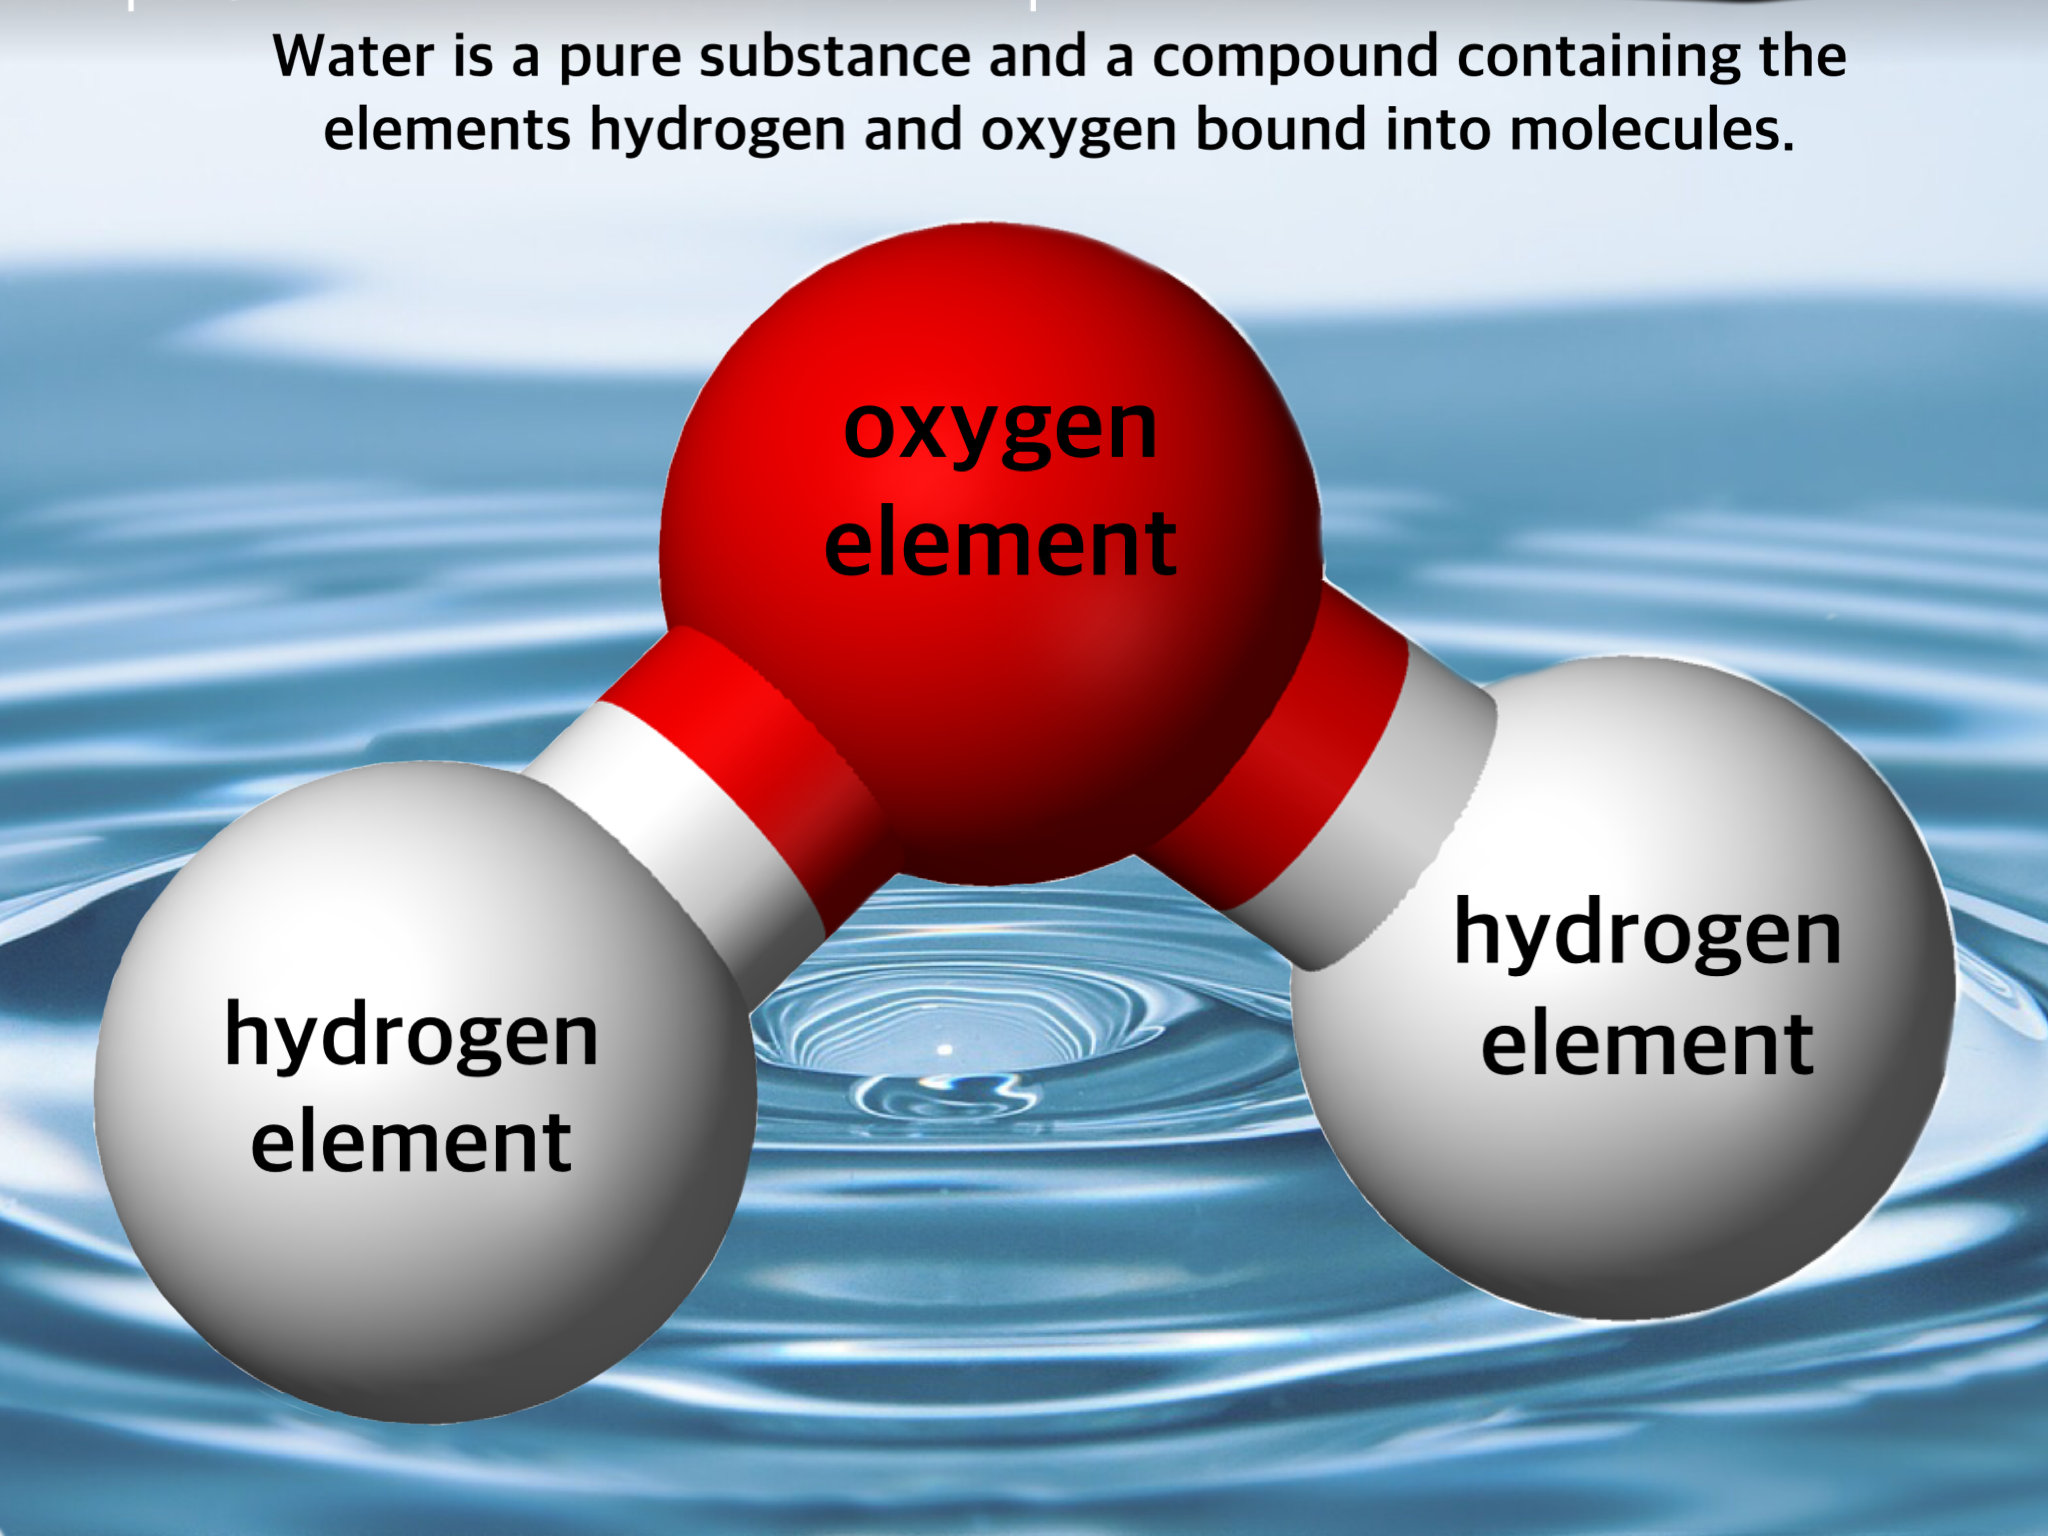 water is a pure substance and a compound containing the elements hydrogen and oxygen bounds into molecules. 